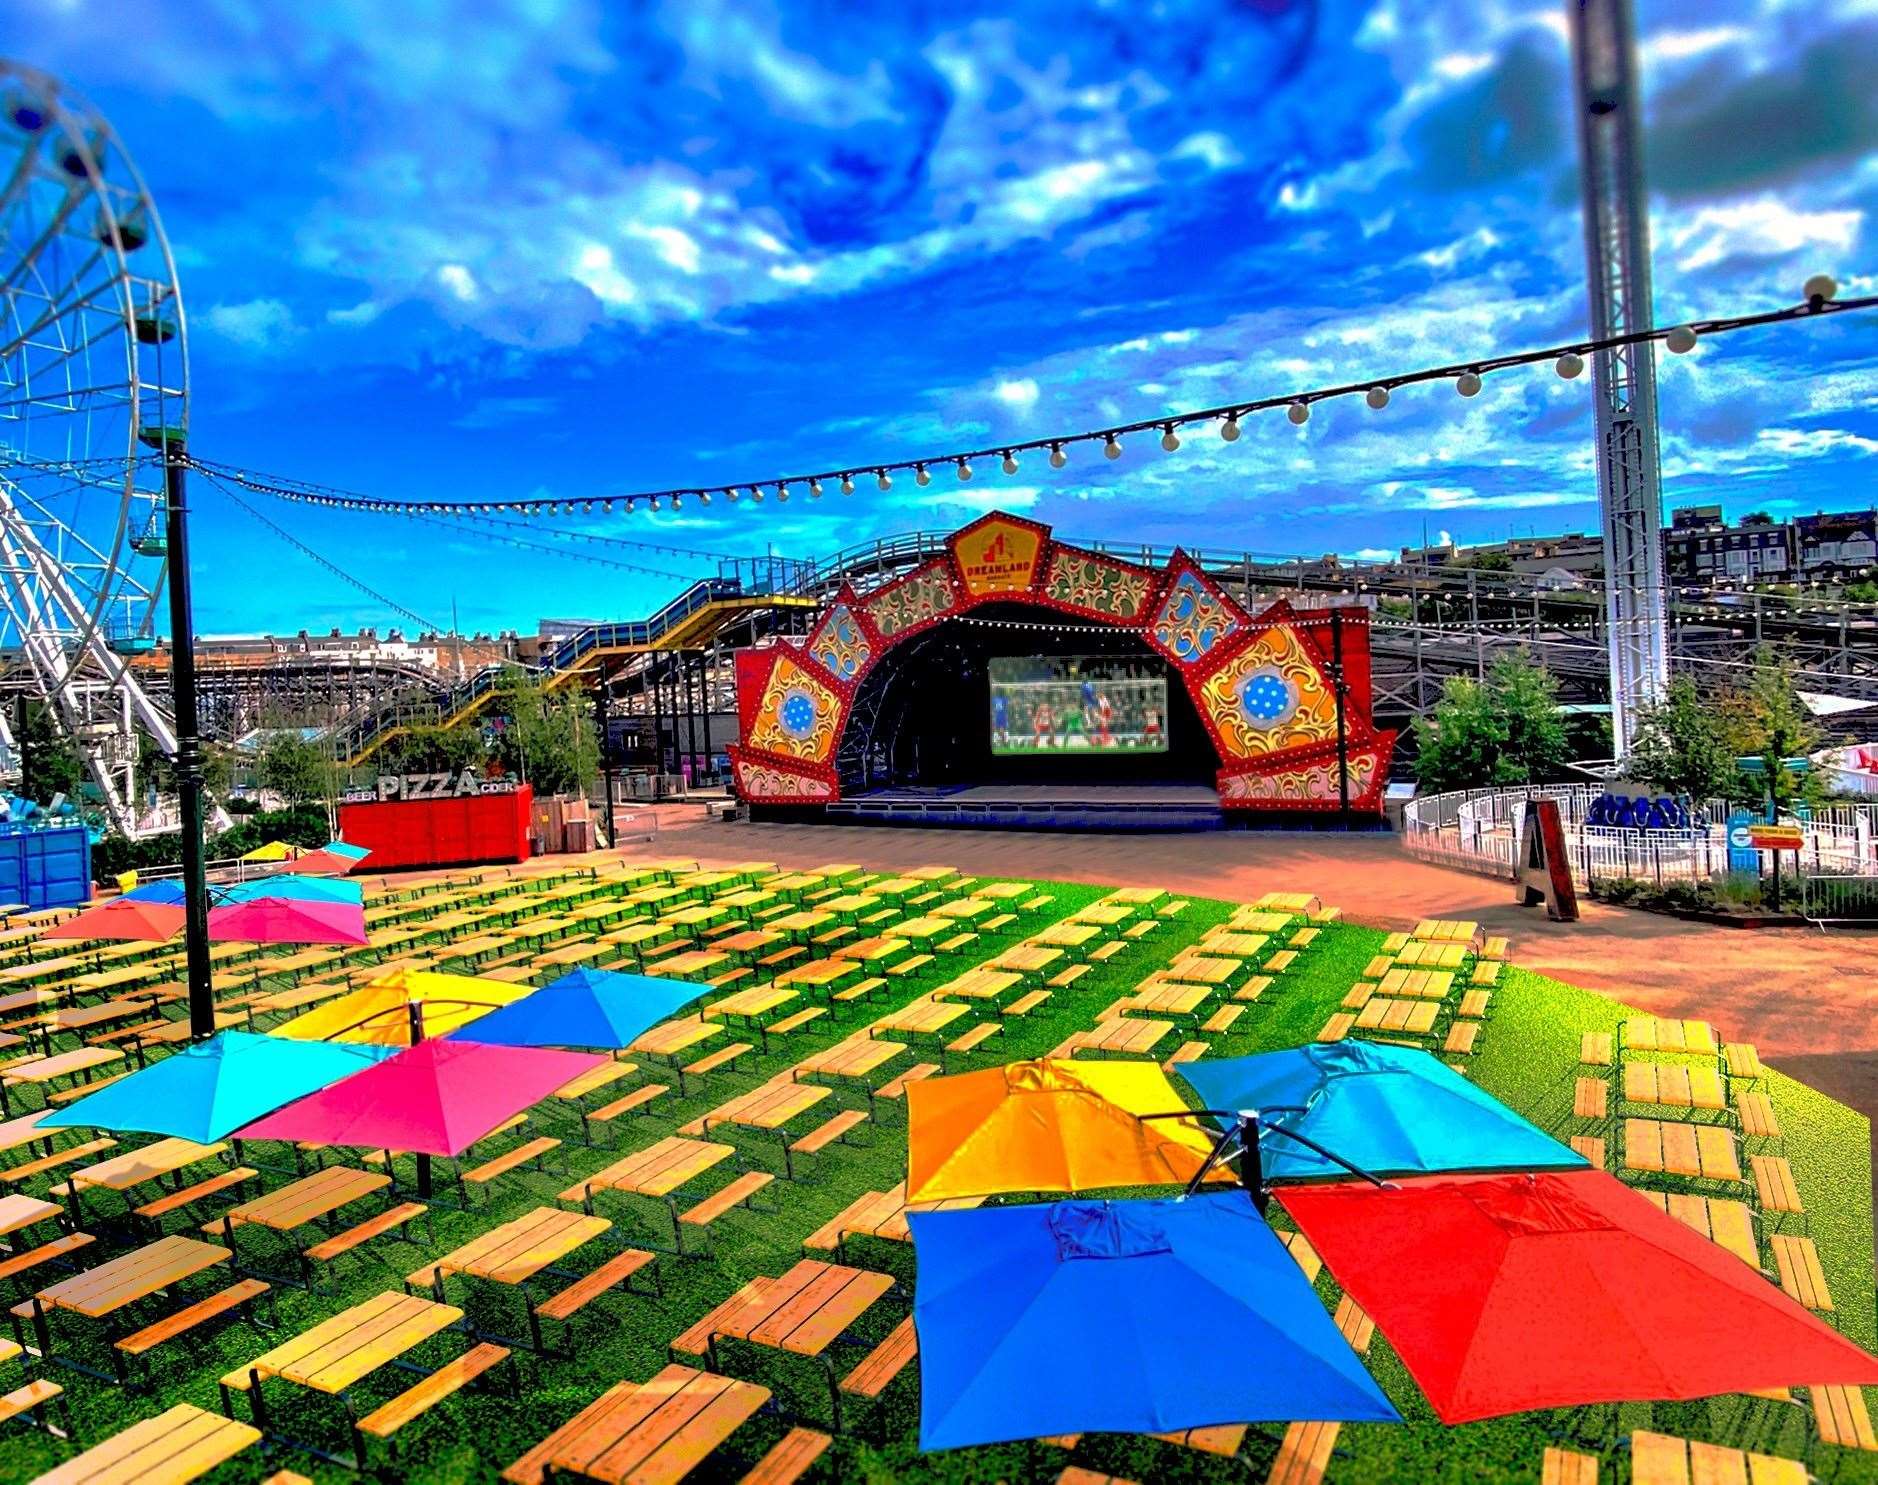 The Dreamland Summer Social will be running throughout the summer. Picture: Dreamland Margate